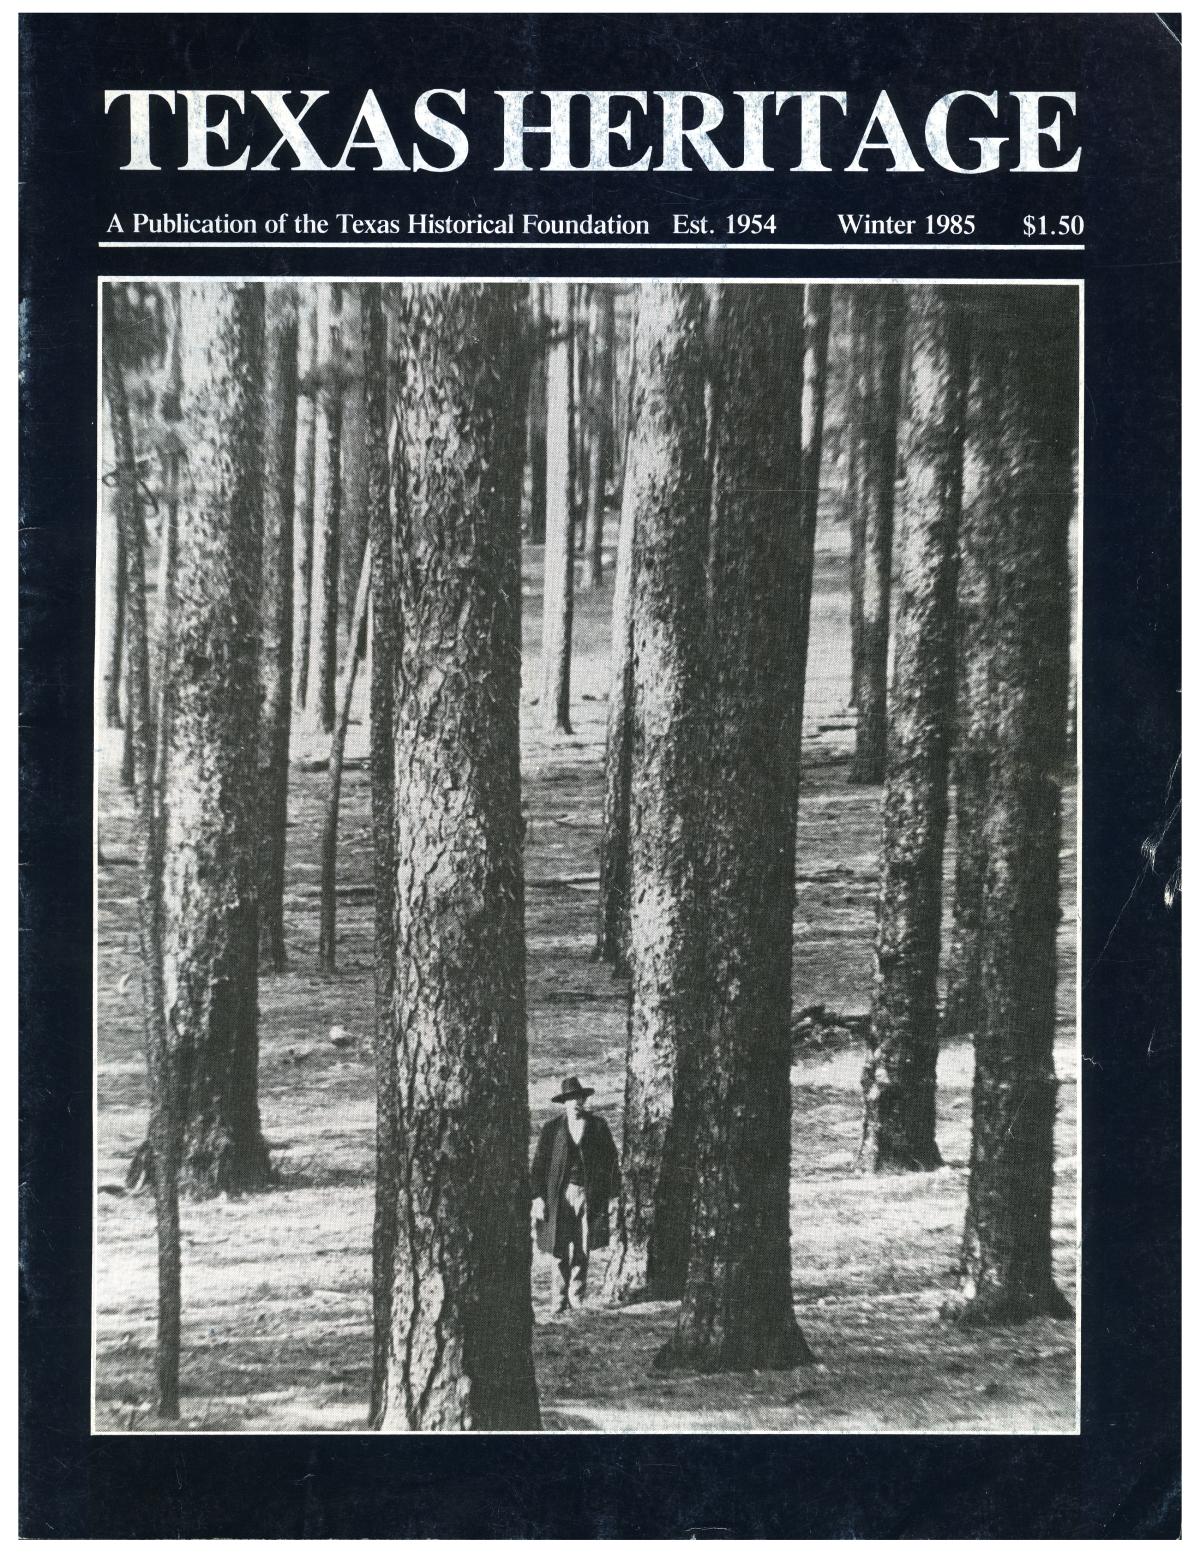 Texas Heritage, Winter 1985
                                                
                                                    Front Cover
                                                